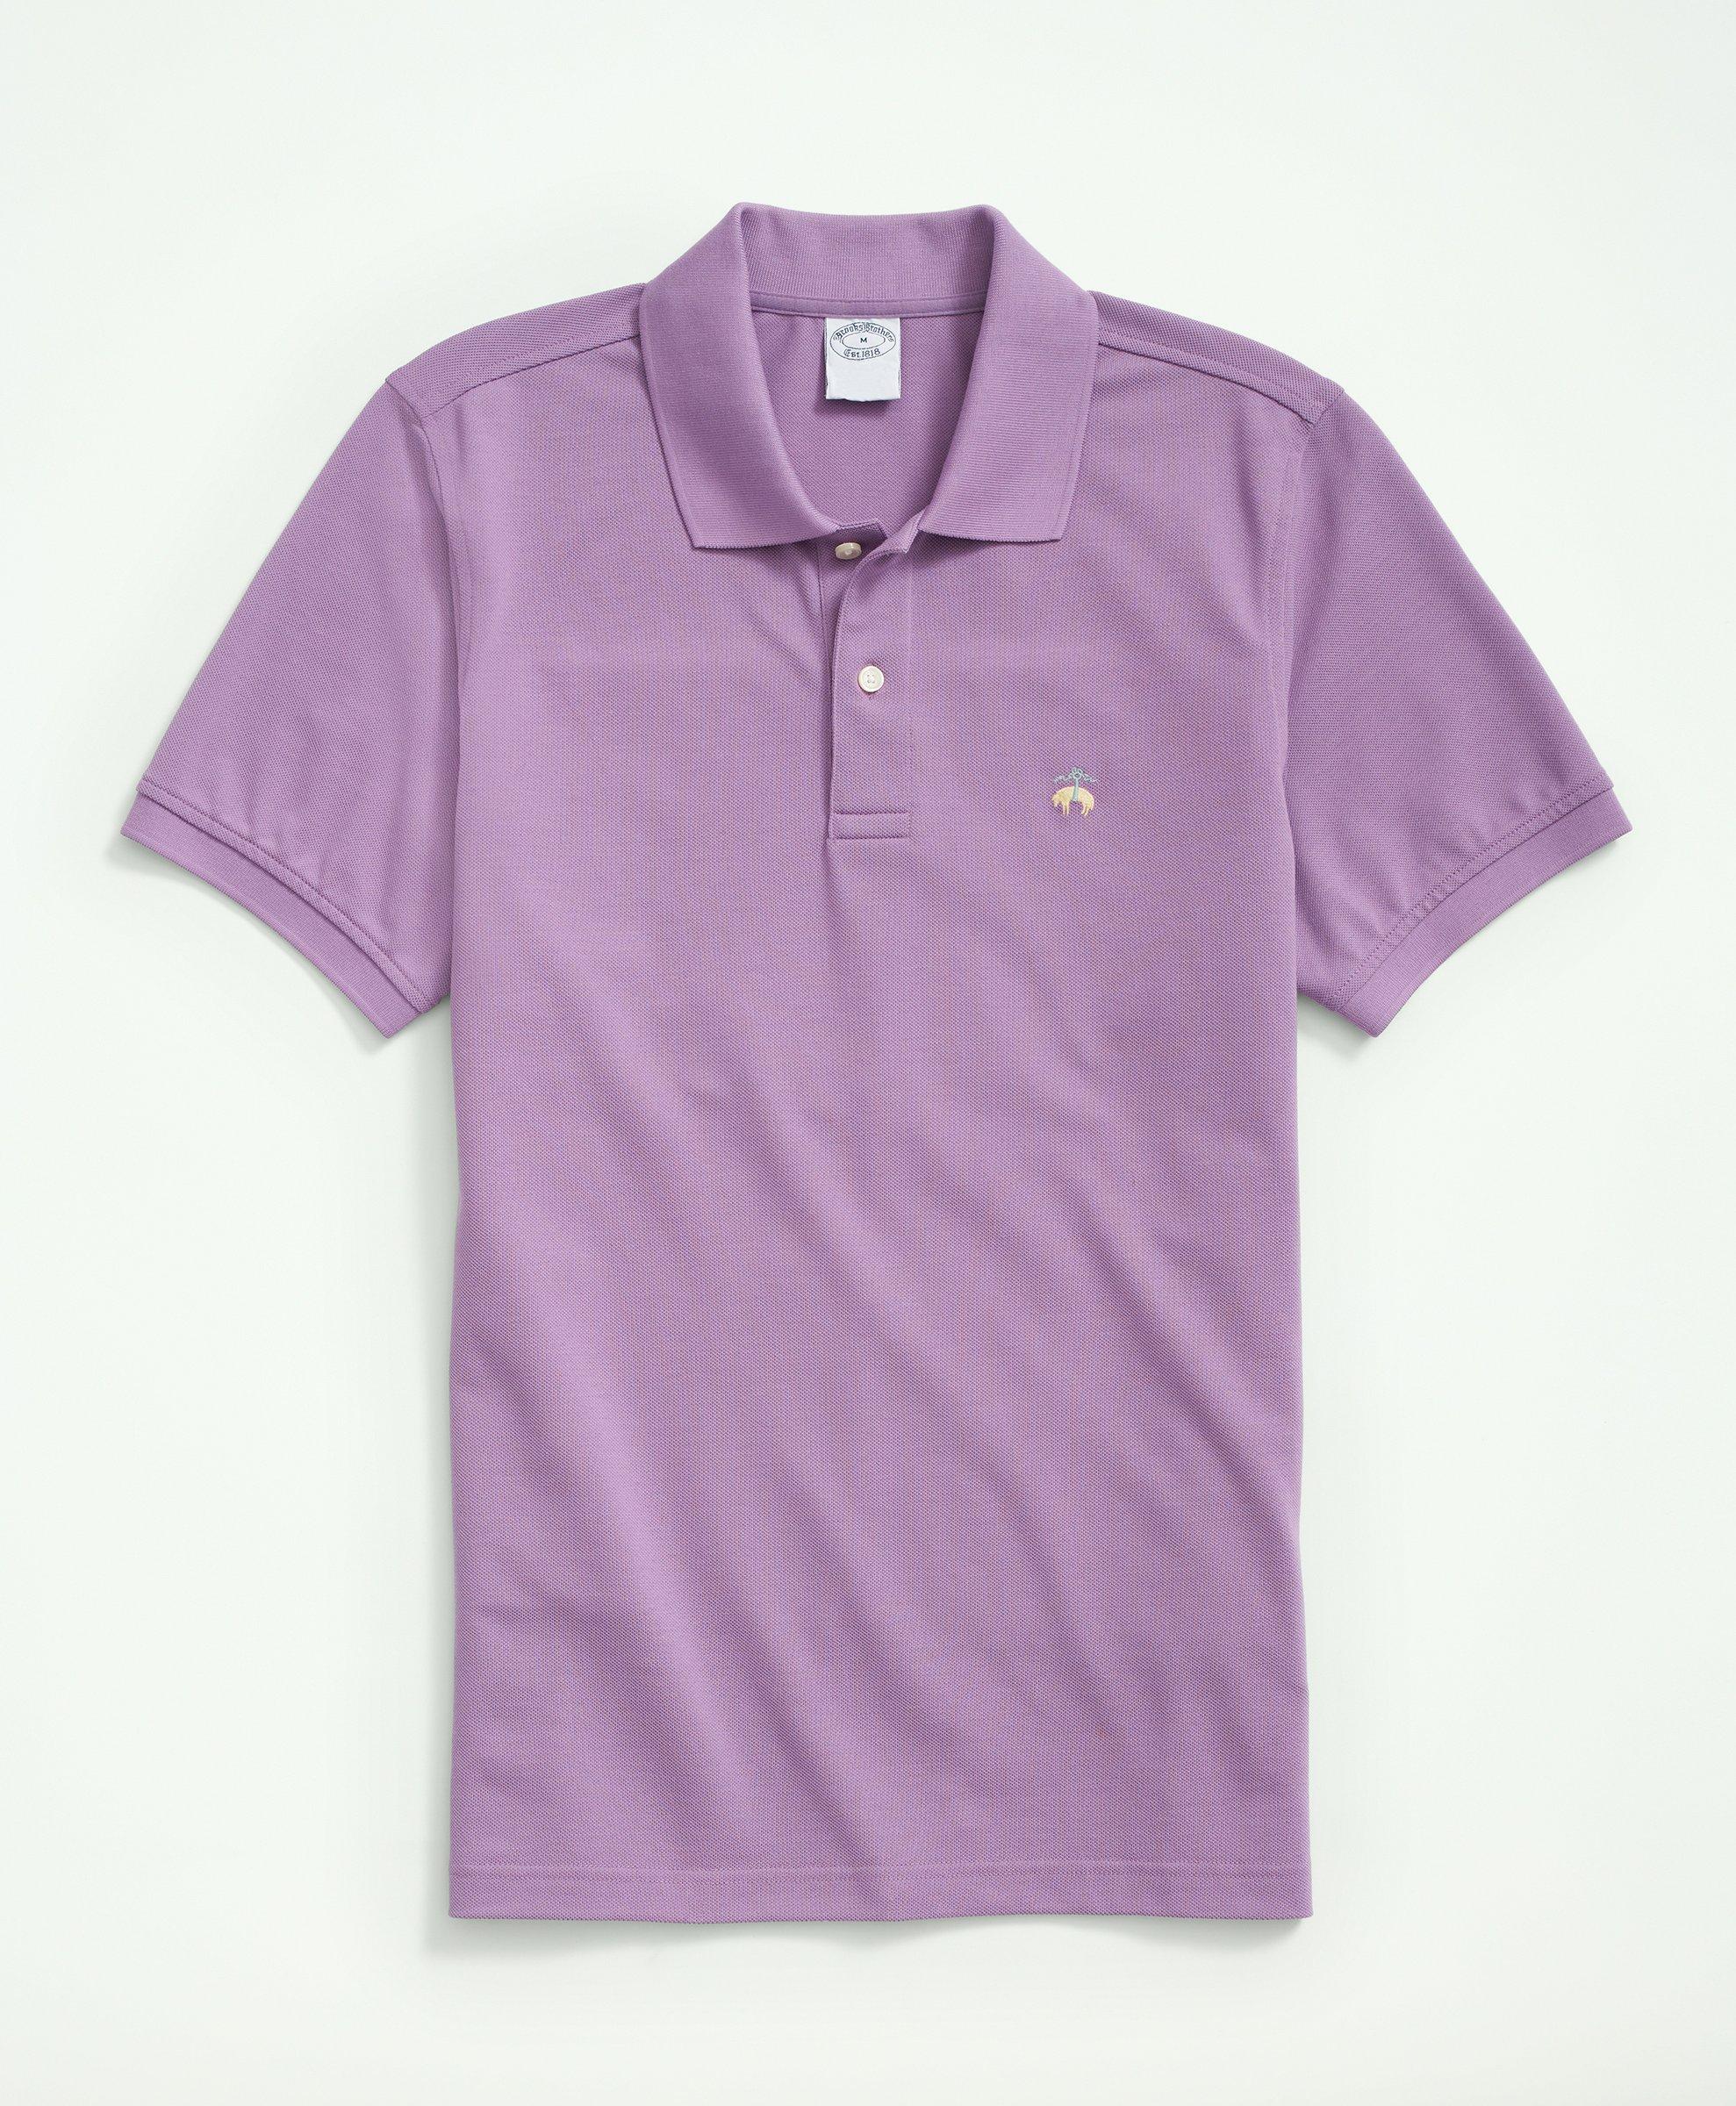 Brooks Brothers Golden Fleece Slim Fit Stretch Supima Polo Shirt | Lavender | Size Small